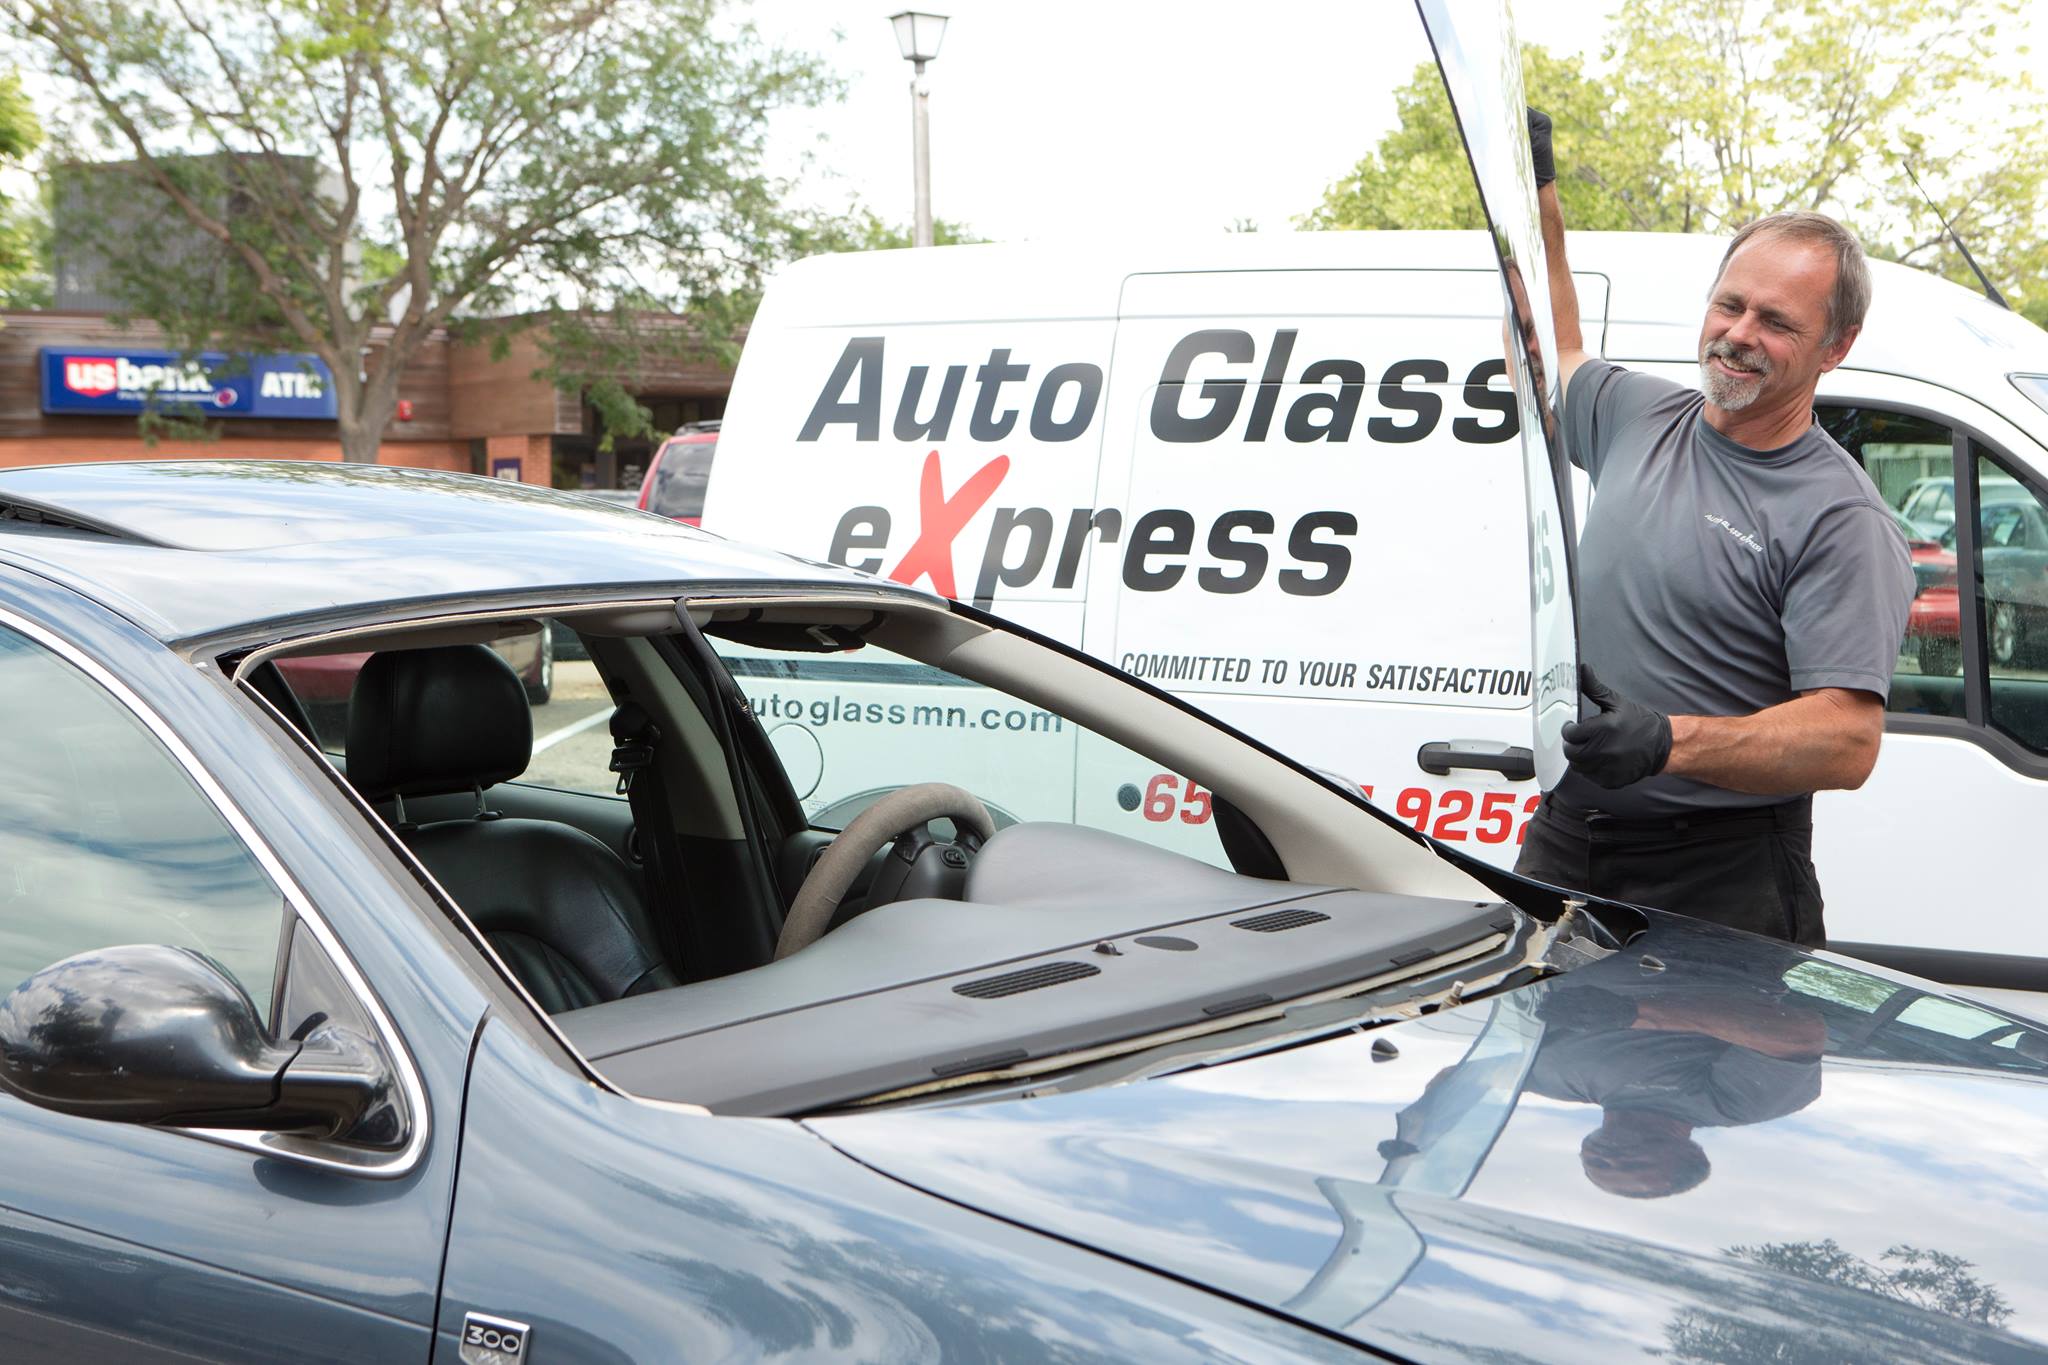 A smiling technician from Auto Glass eXpress as he replaces a car windshield. He is holding a large sheet of glass in his gloved hands, positioning it to fit into the frame of a dark-colored vehicle. The technician is wearing a grey shirt and black gloves, working efficiently and carefully. In the background, a white company van with the Auto Glass eXpress logo and contact information is parked, indicating the mobile service. The scene takes place outdoors, with trees and buildings visible in the background, highlighting the professional and convenient service provided by Auto Glass eXpress.